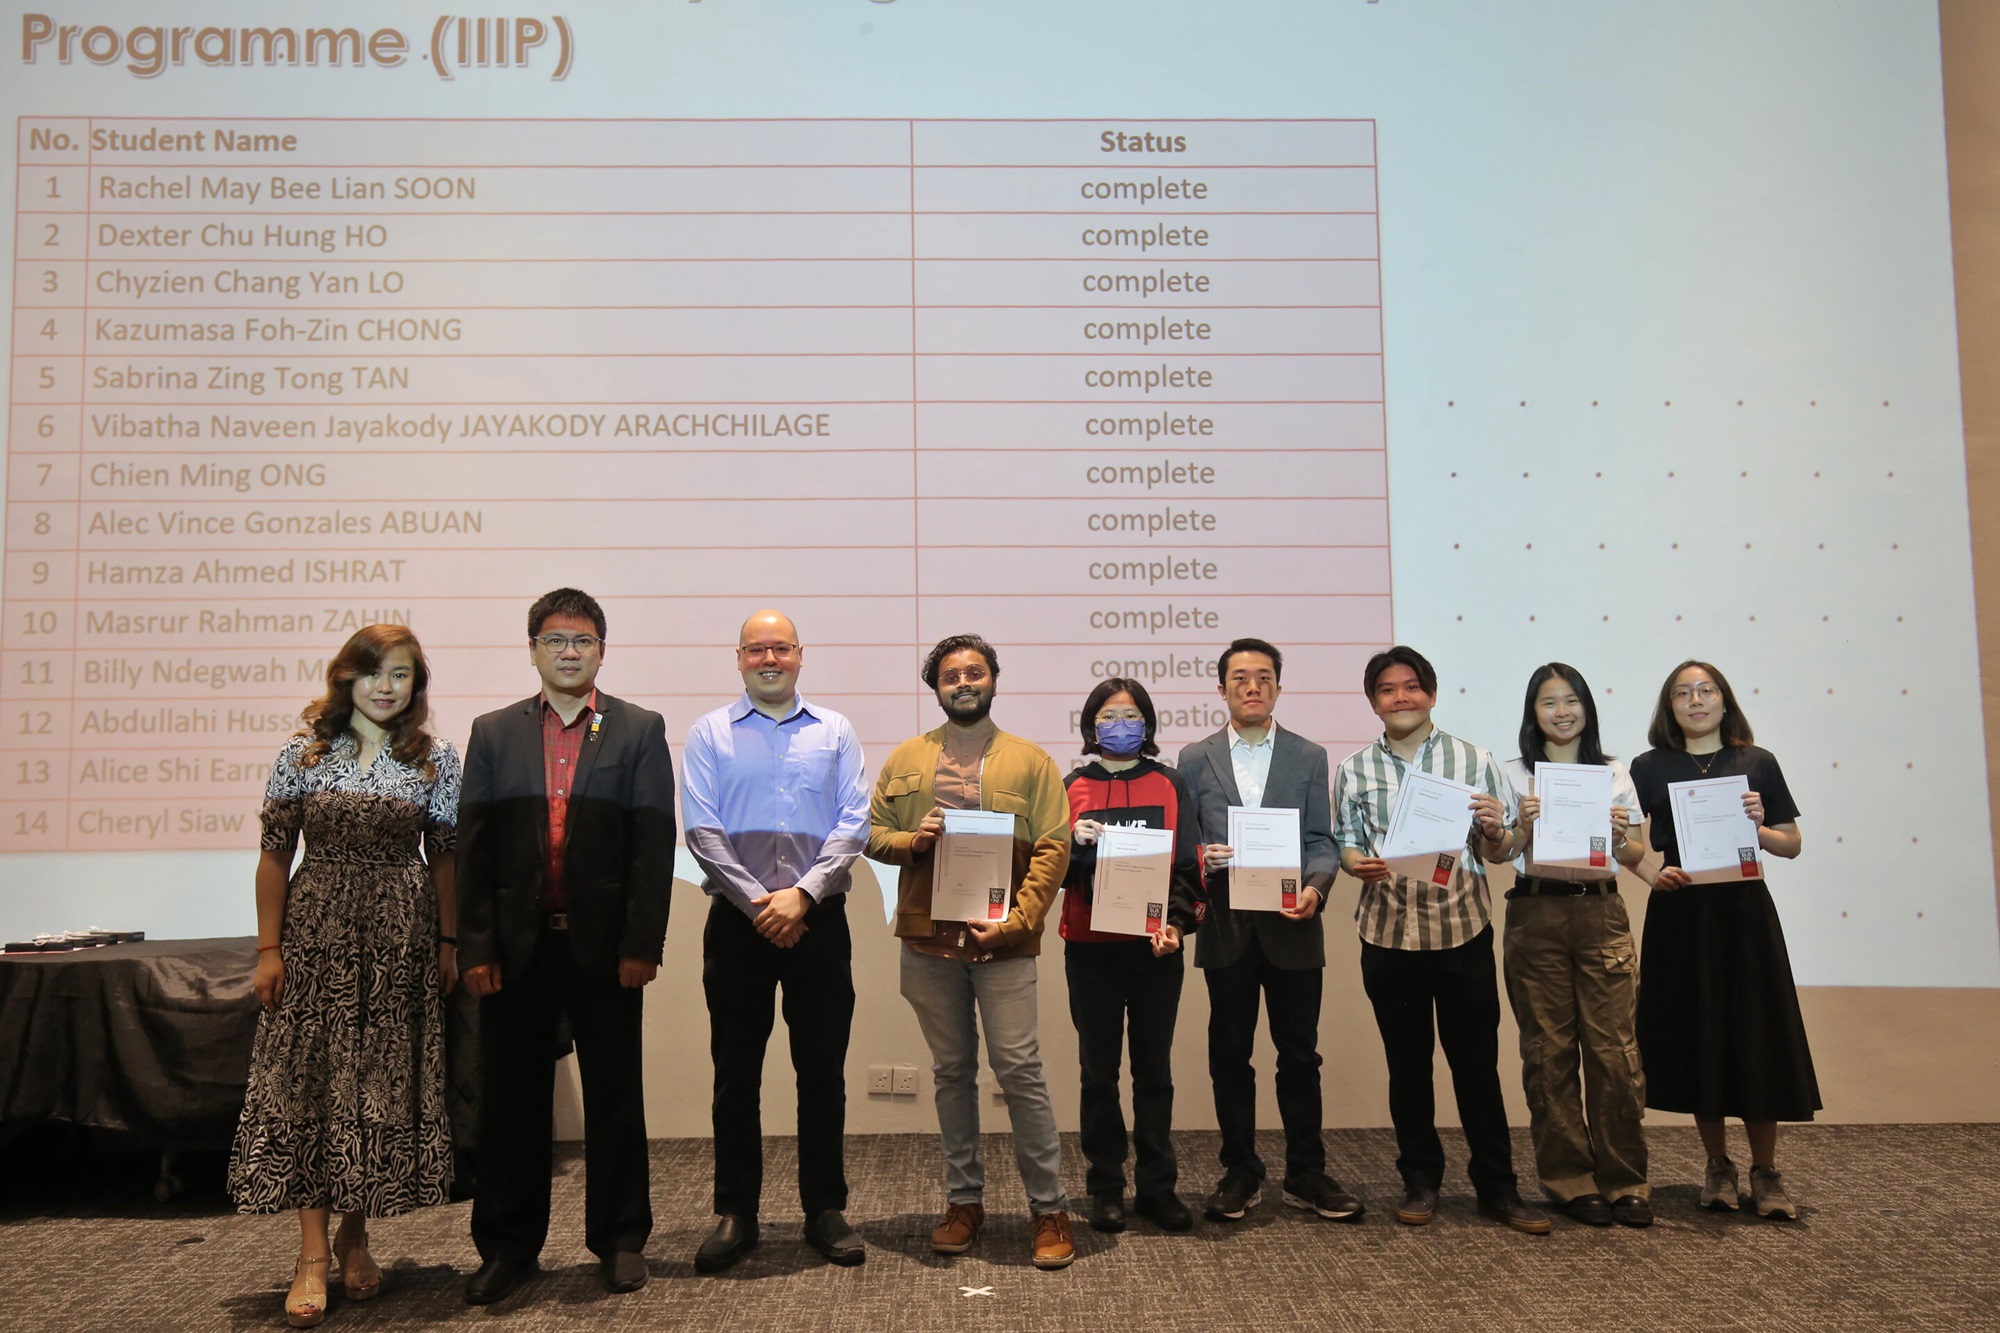 Presentation of the School of ICT Industry Integrated Internship Program (IIIP) certificates to recipients by Ir Associate Professor Dr Chua Hong Siang (second left), Head of School, School of Engineering and Science, witnessed by (from left) Ir Ts Dr Liew San Chuin, Associate Dean (External Engagement and Impact), Faculty of Engineering, Computing and Science, and Dr Brian Loh Chung Shiong, Deputy Head of School, School of ICT.